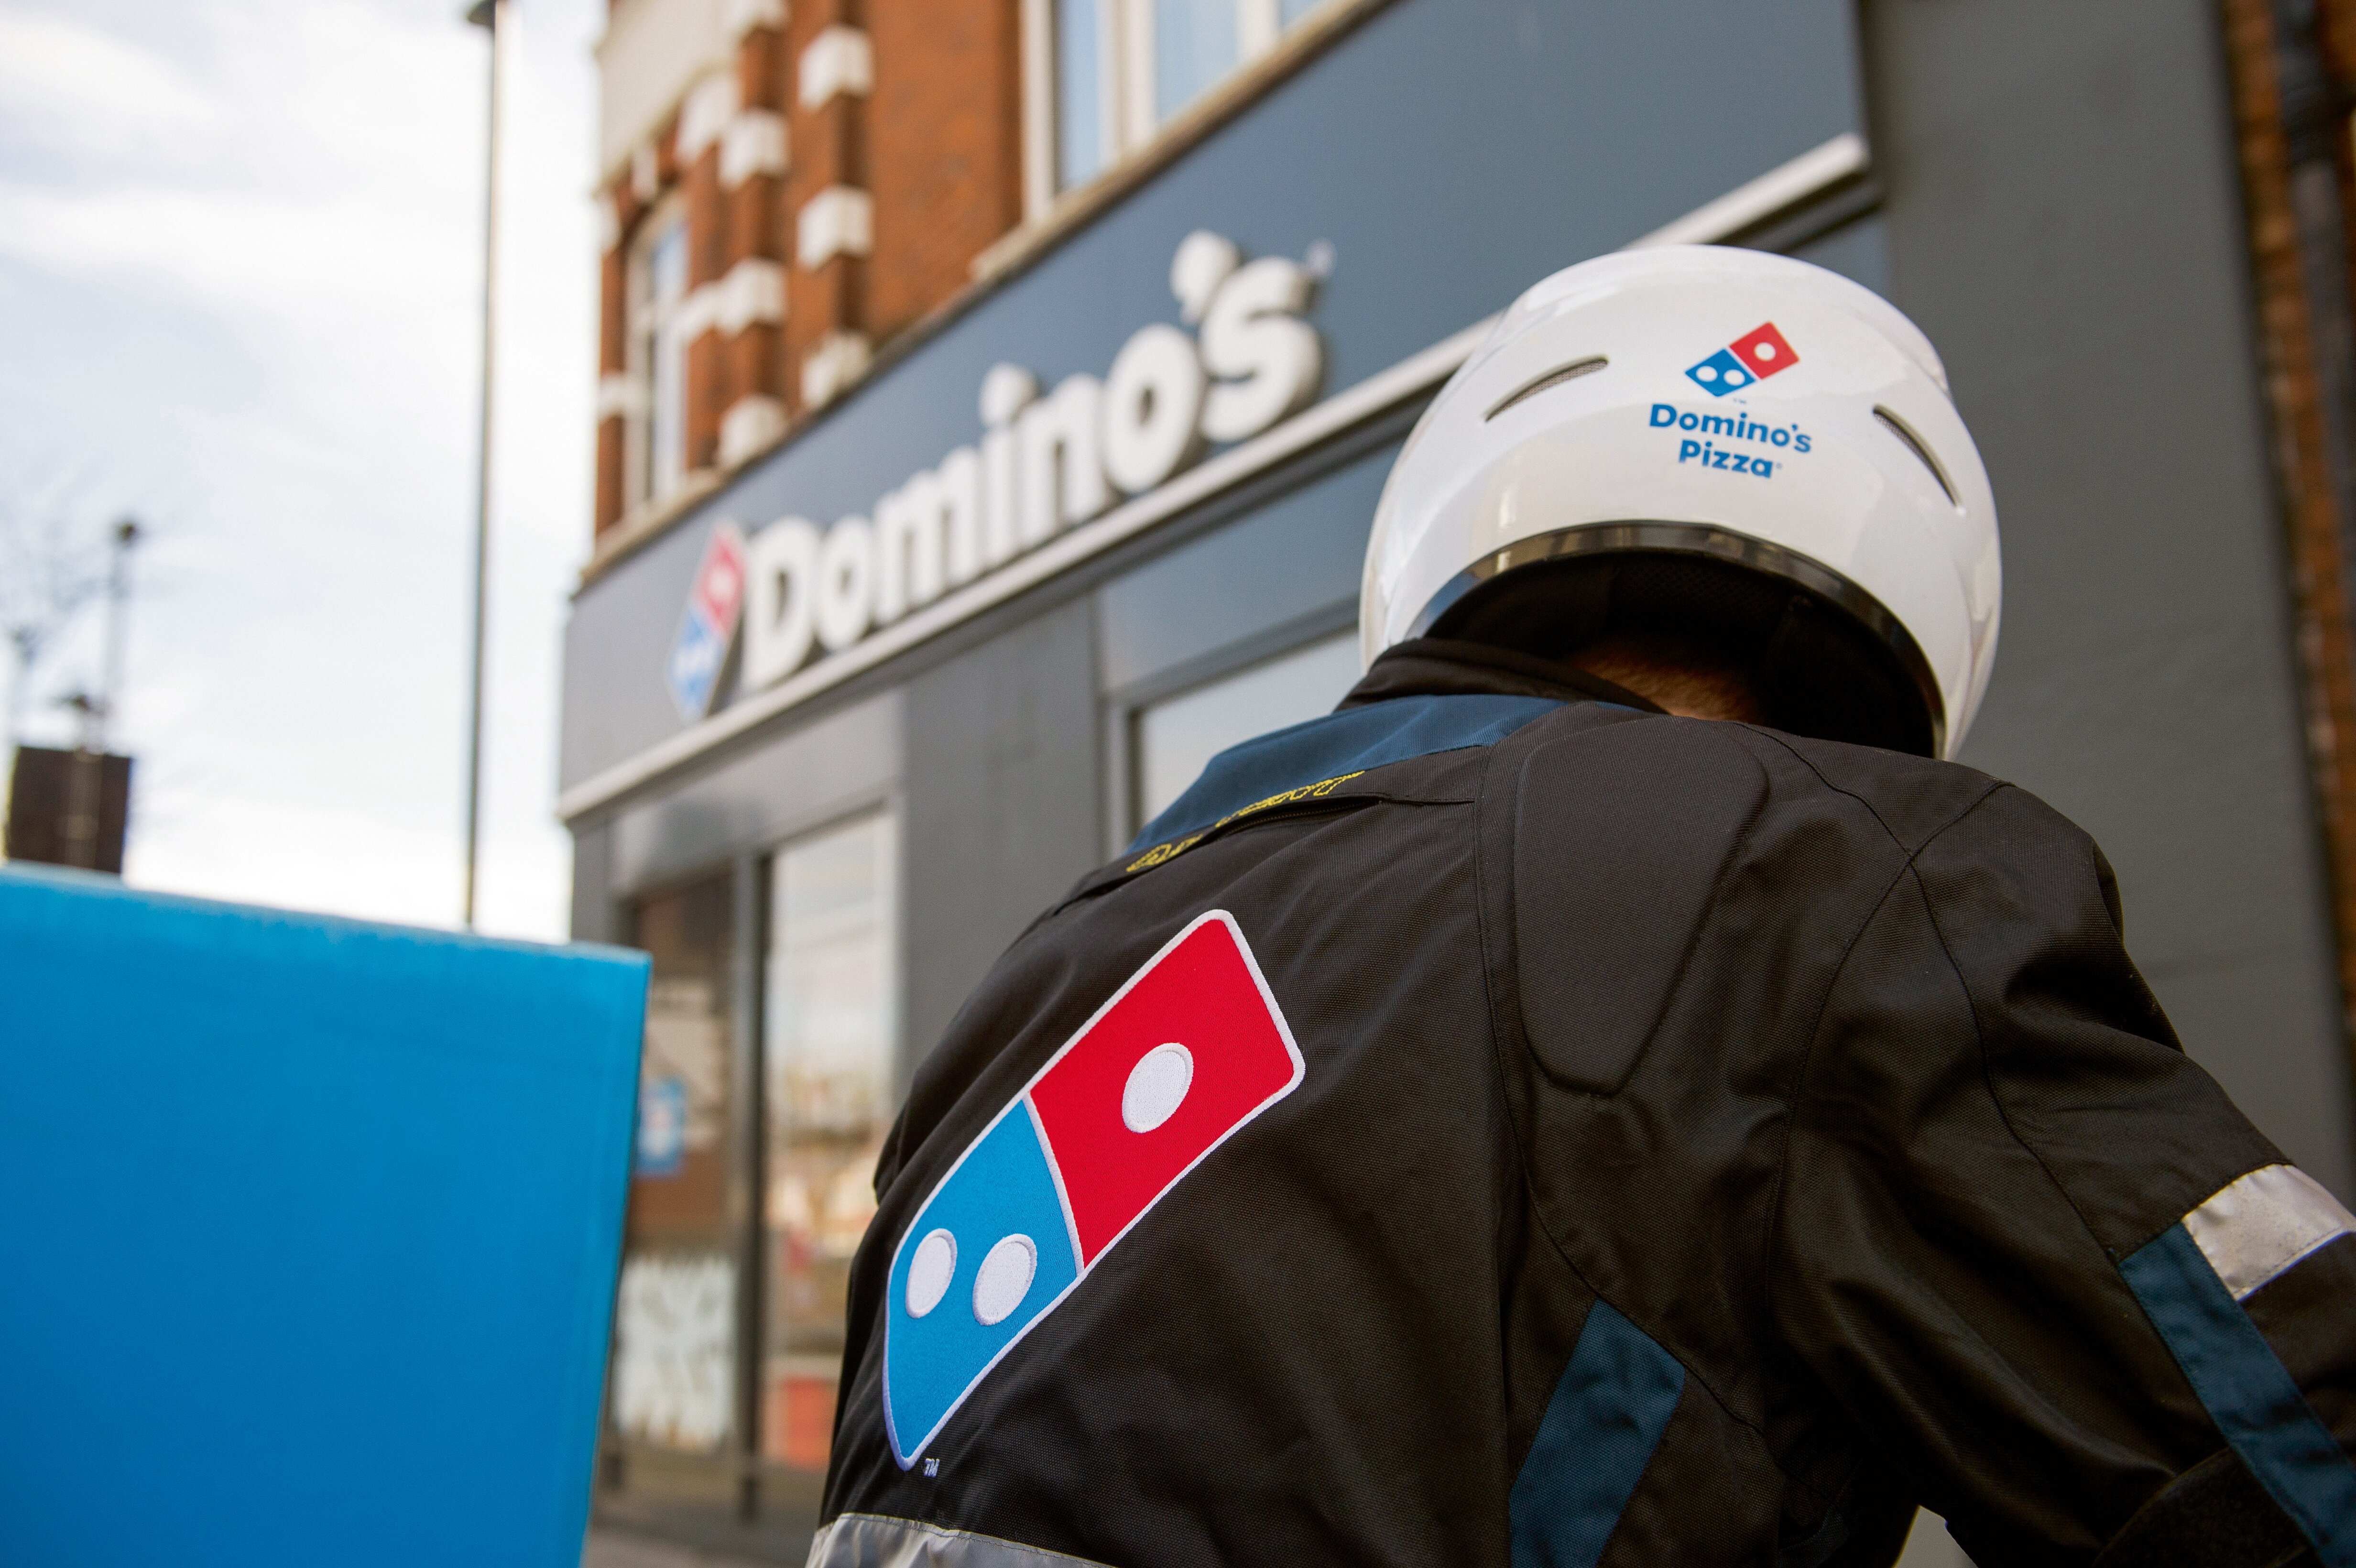 Domino’s delivers 5,000 new jobs